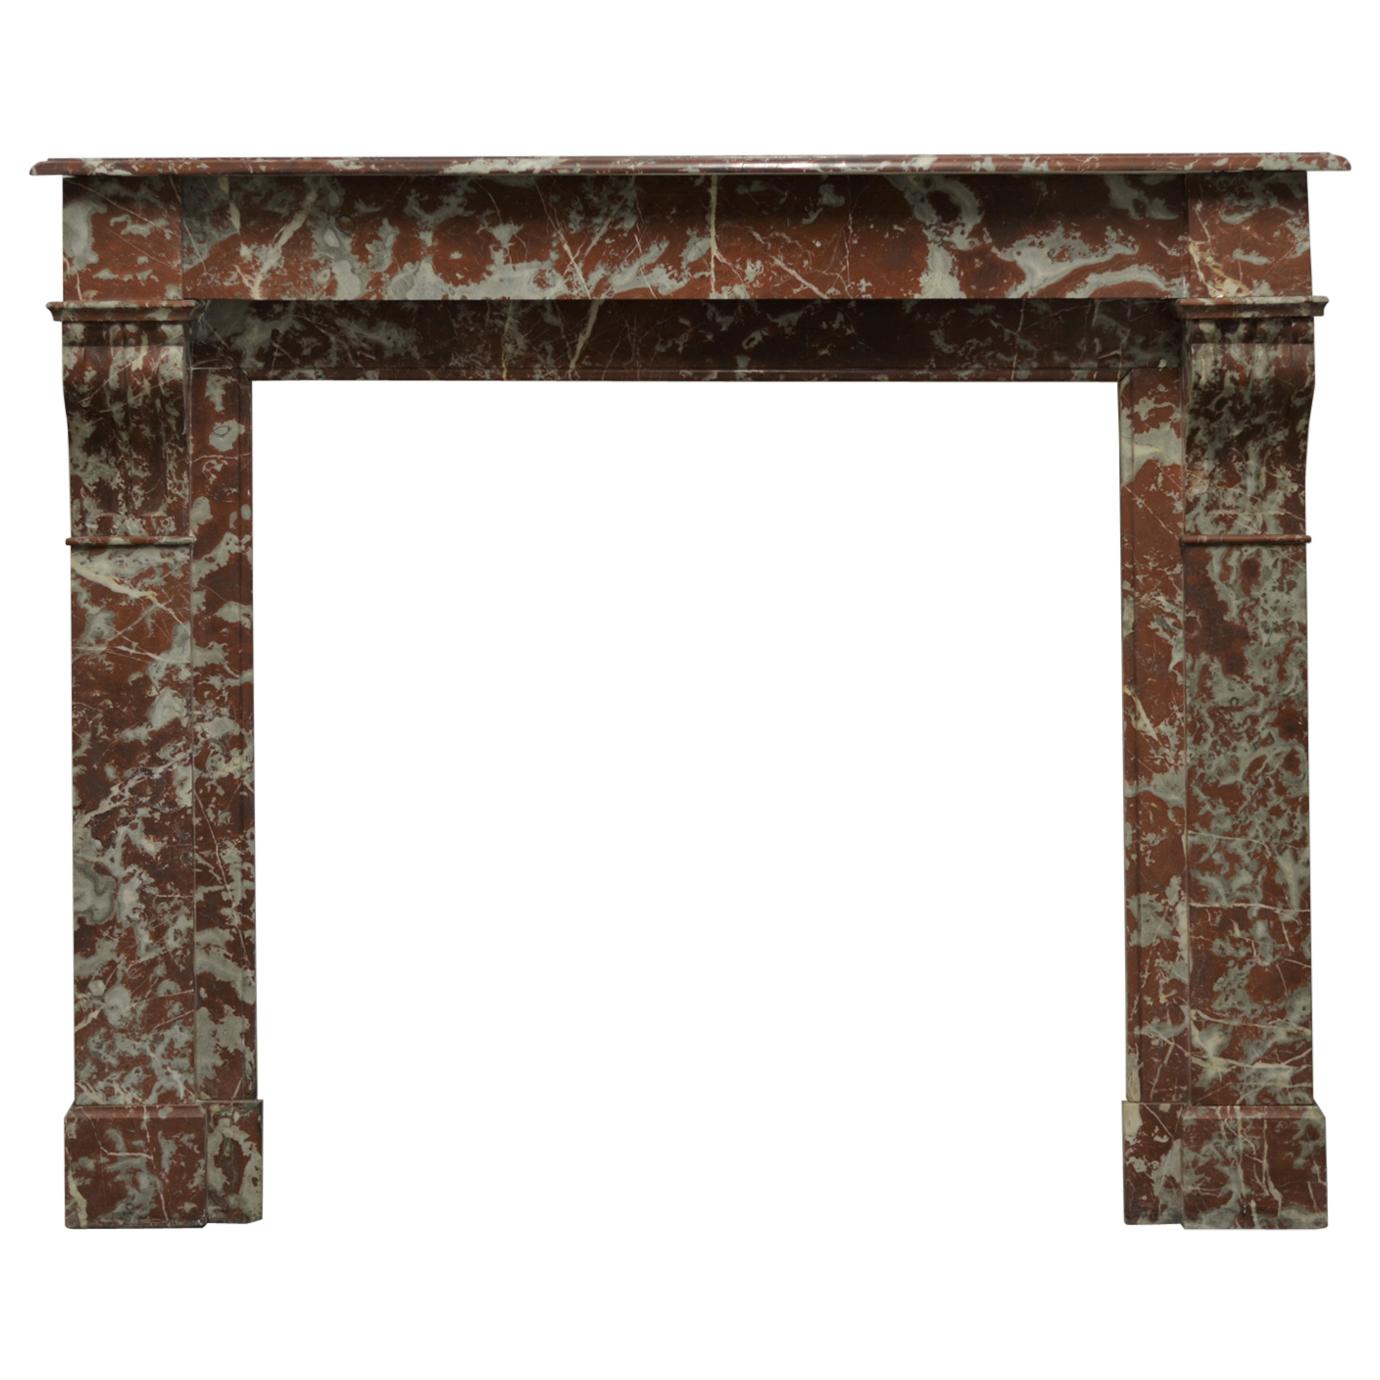 19th Century Antique Fireplace Mantel in Red Marble